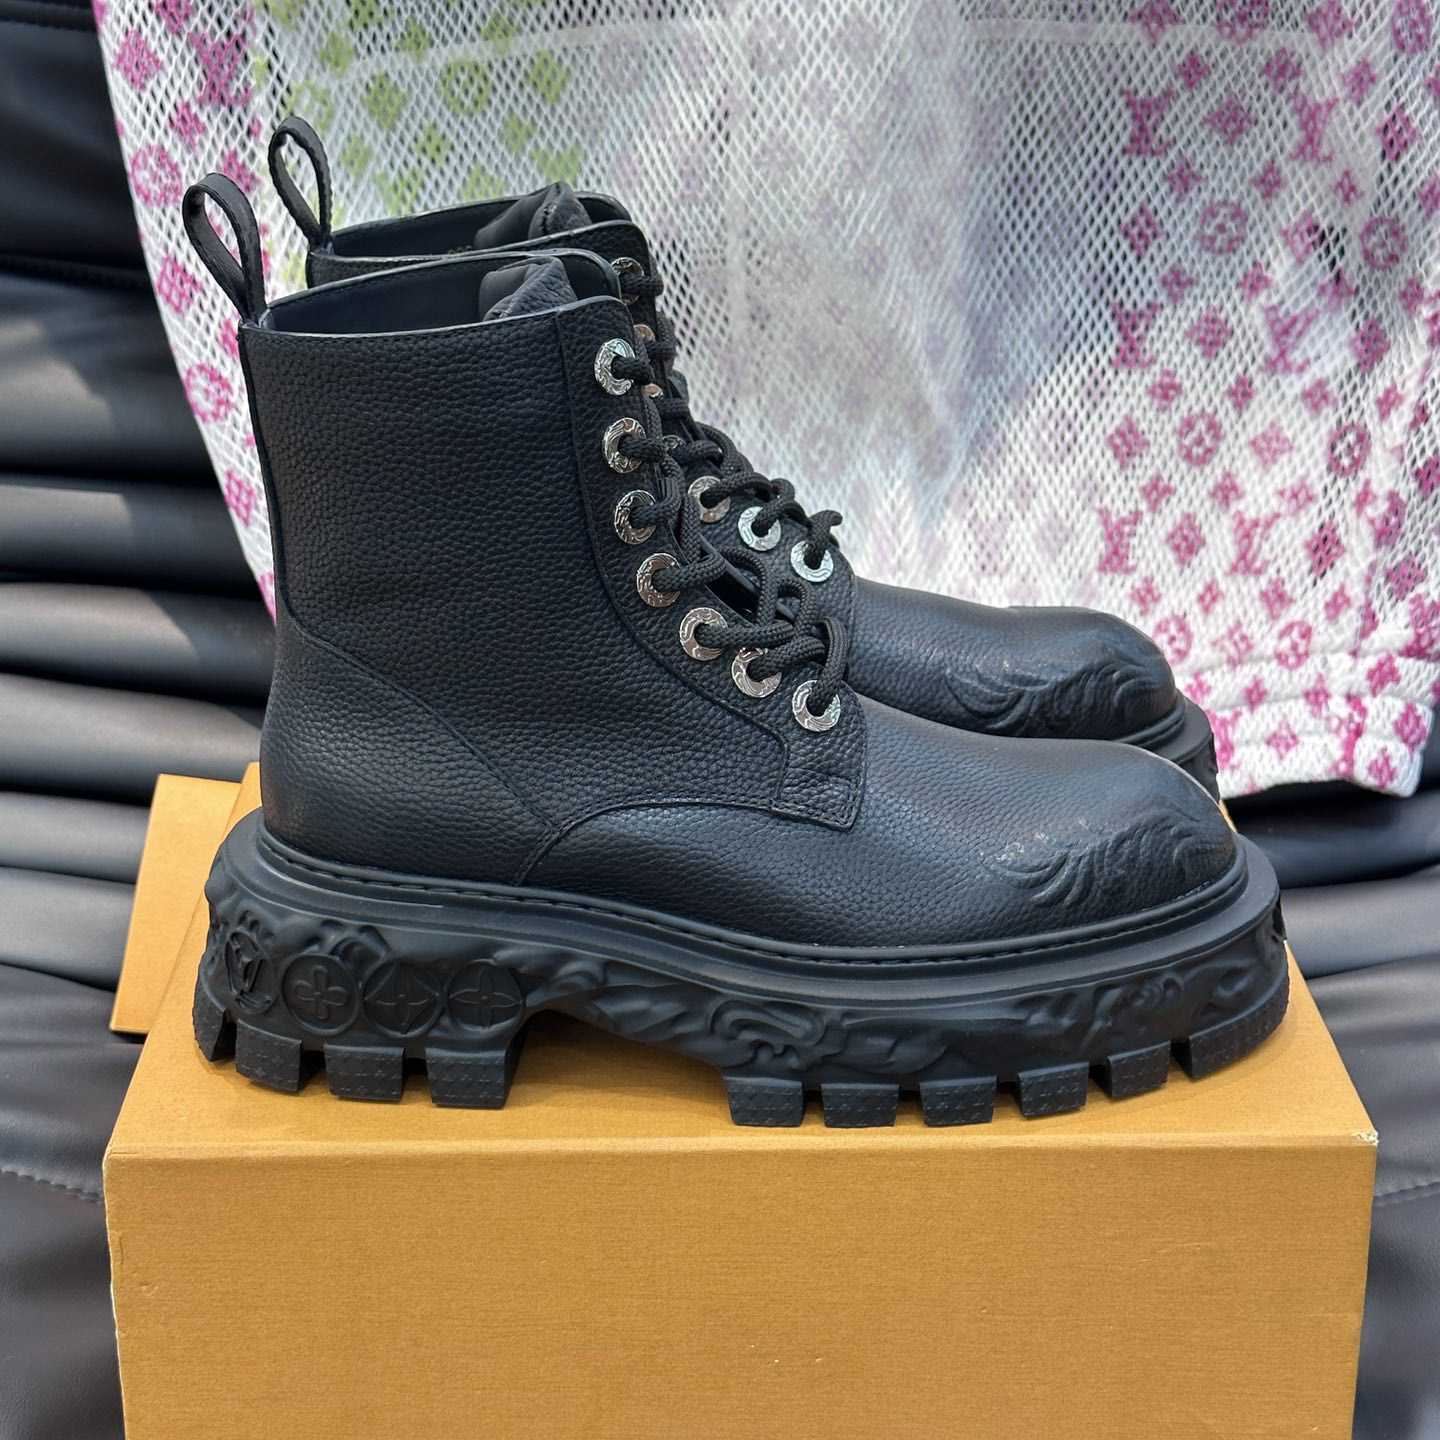 LOUIS VUITTON BAROQUE RANGER BOOT (1AB8NH) SOLD OUT